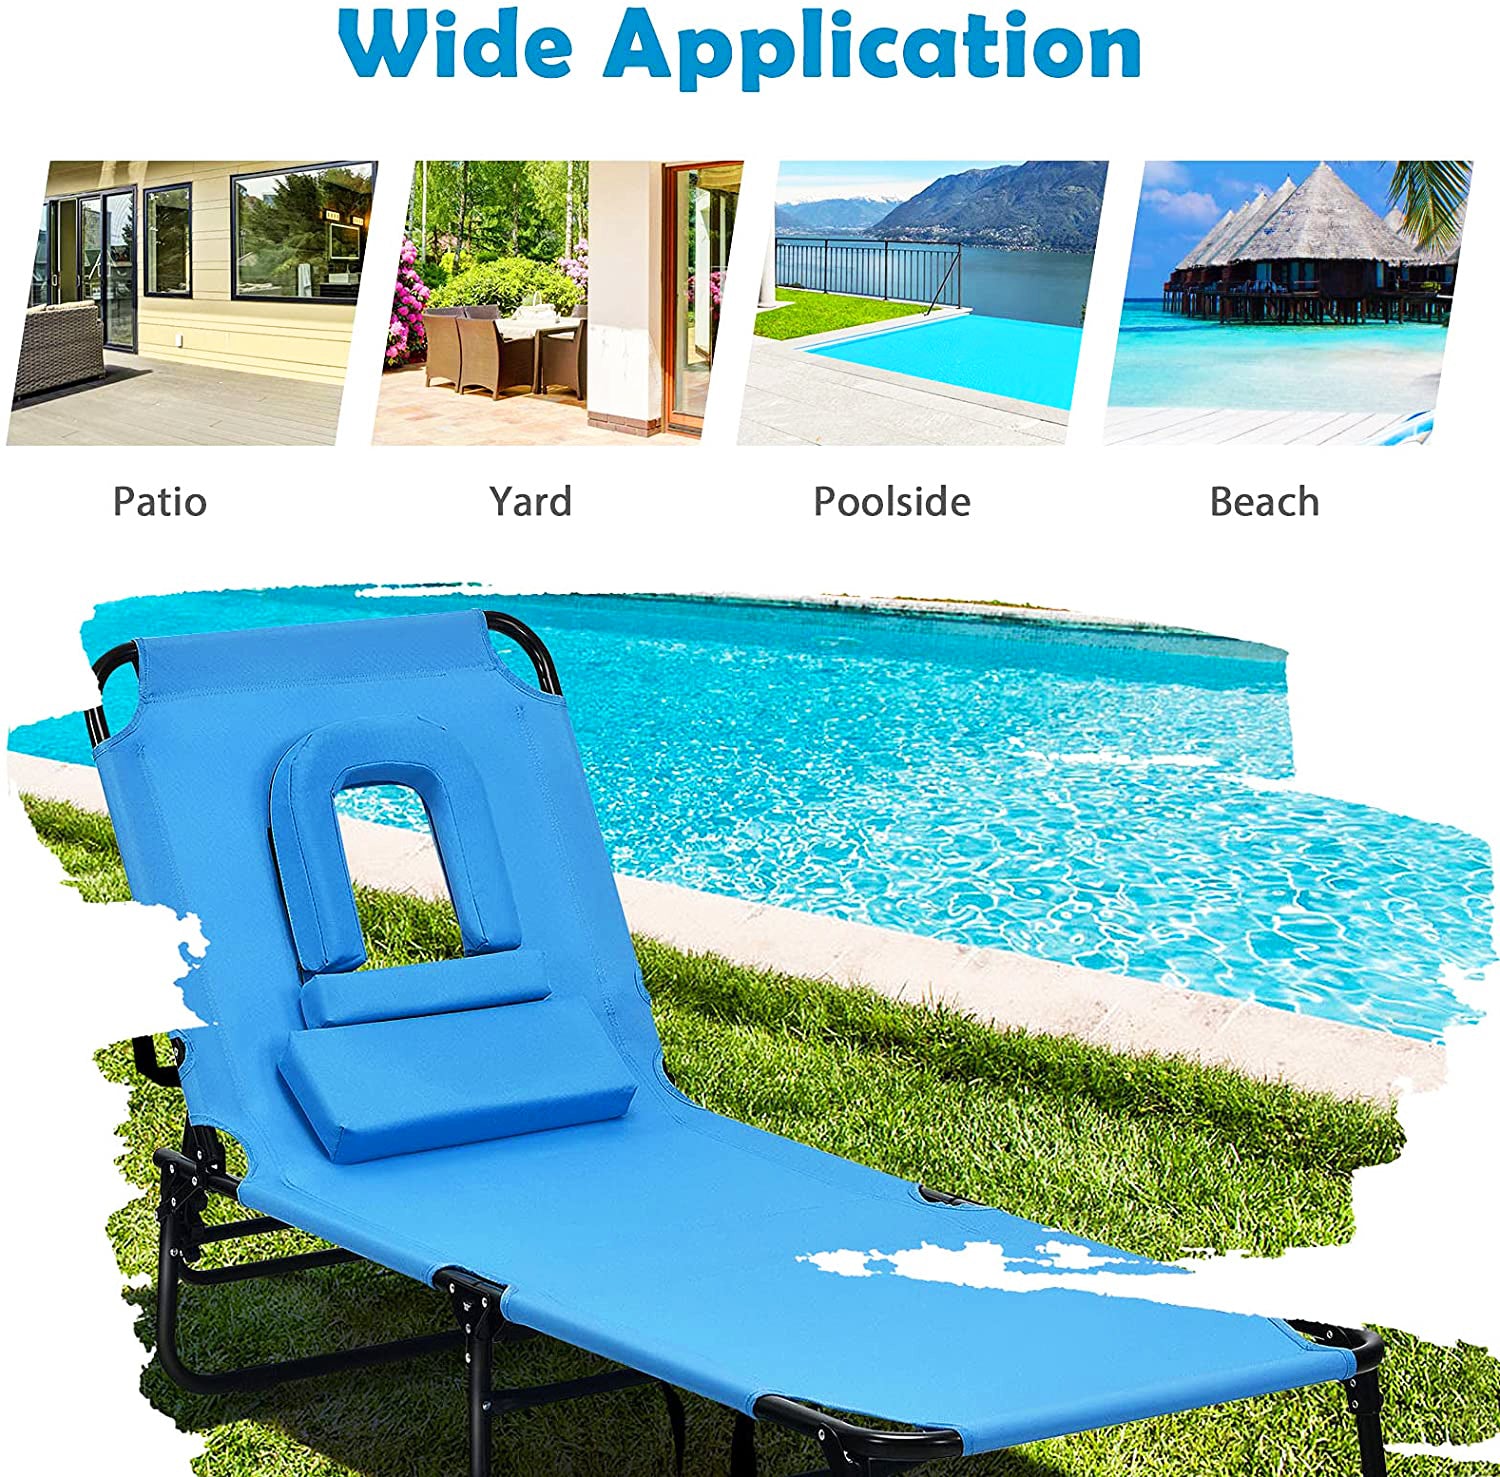 Folding Steel Outdoor Lounge Chair in Blue with Adjustable Back and Hole